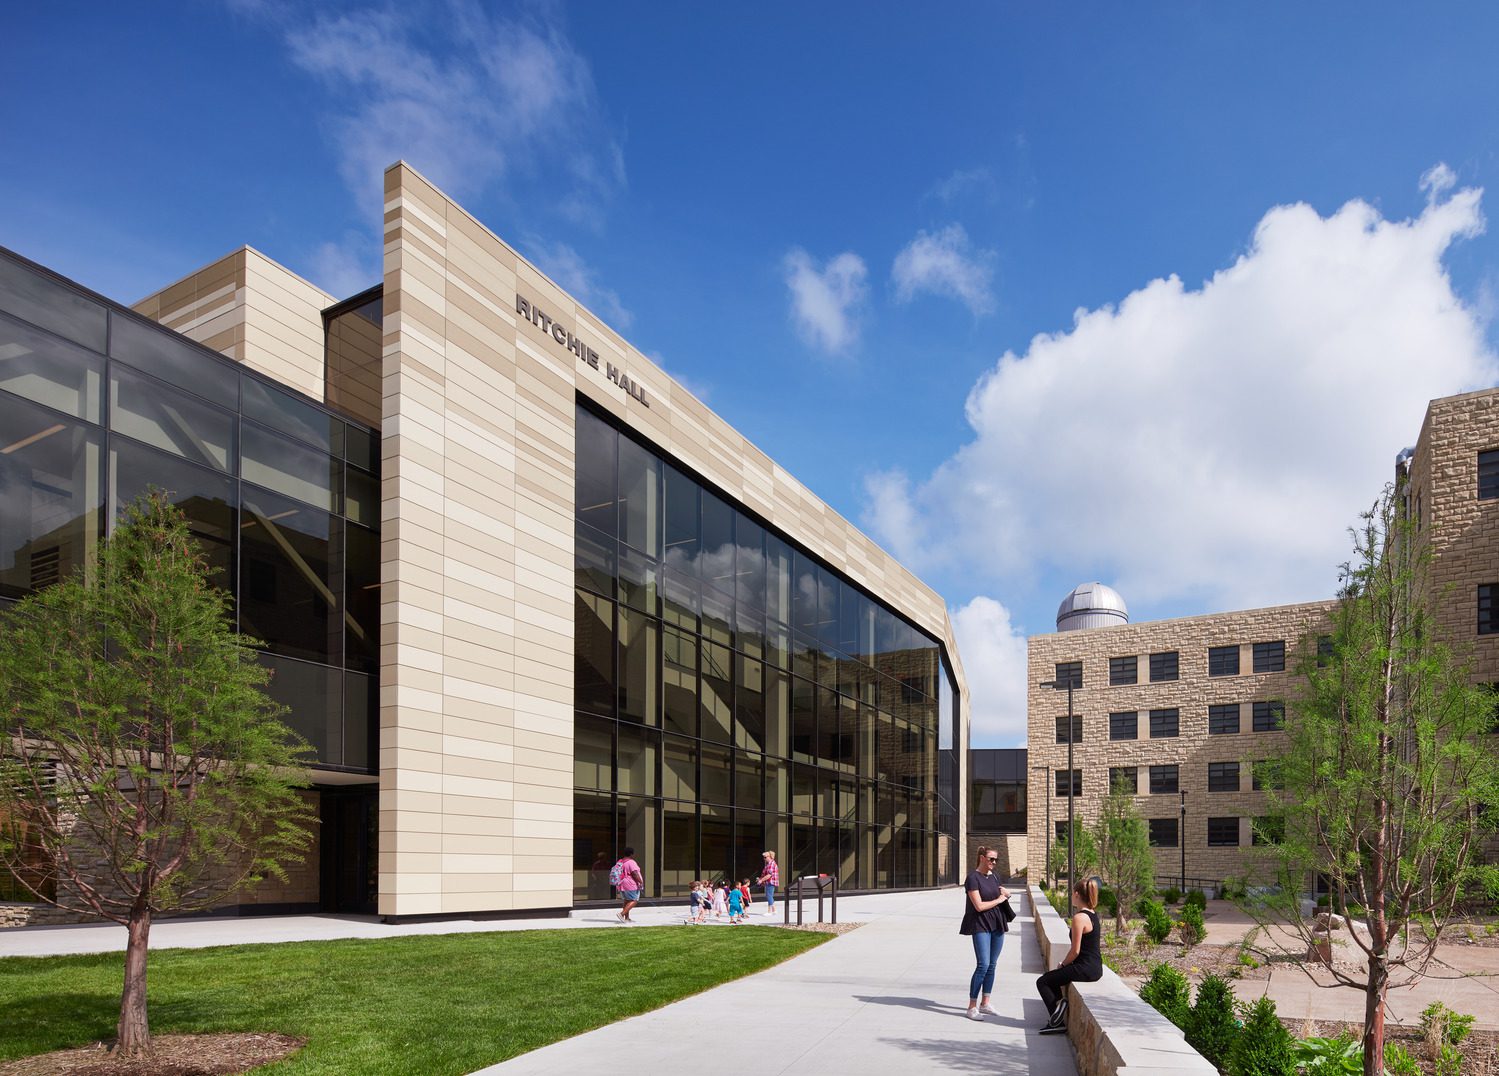 Image of the exterior of the KU Earth, Energy & Environment Center showing transparency towards the campus.